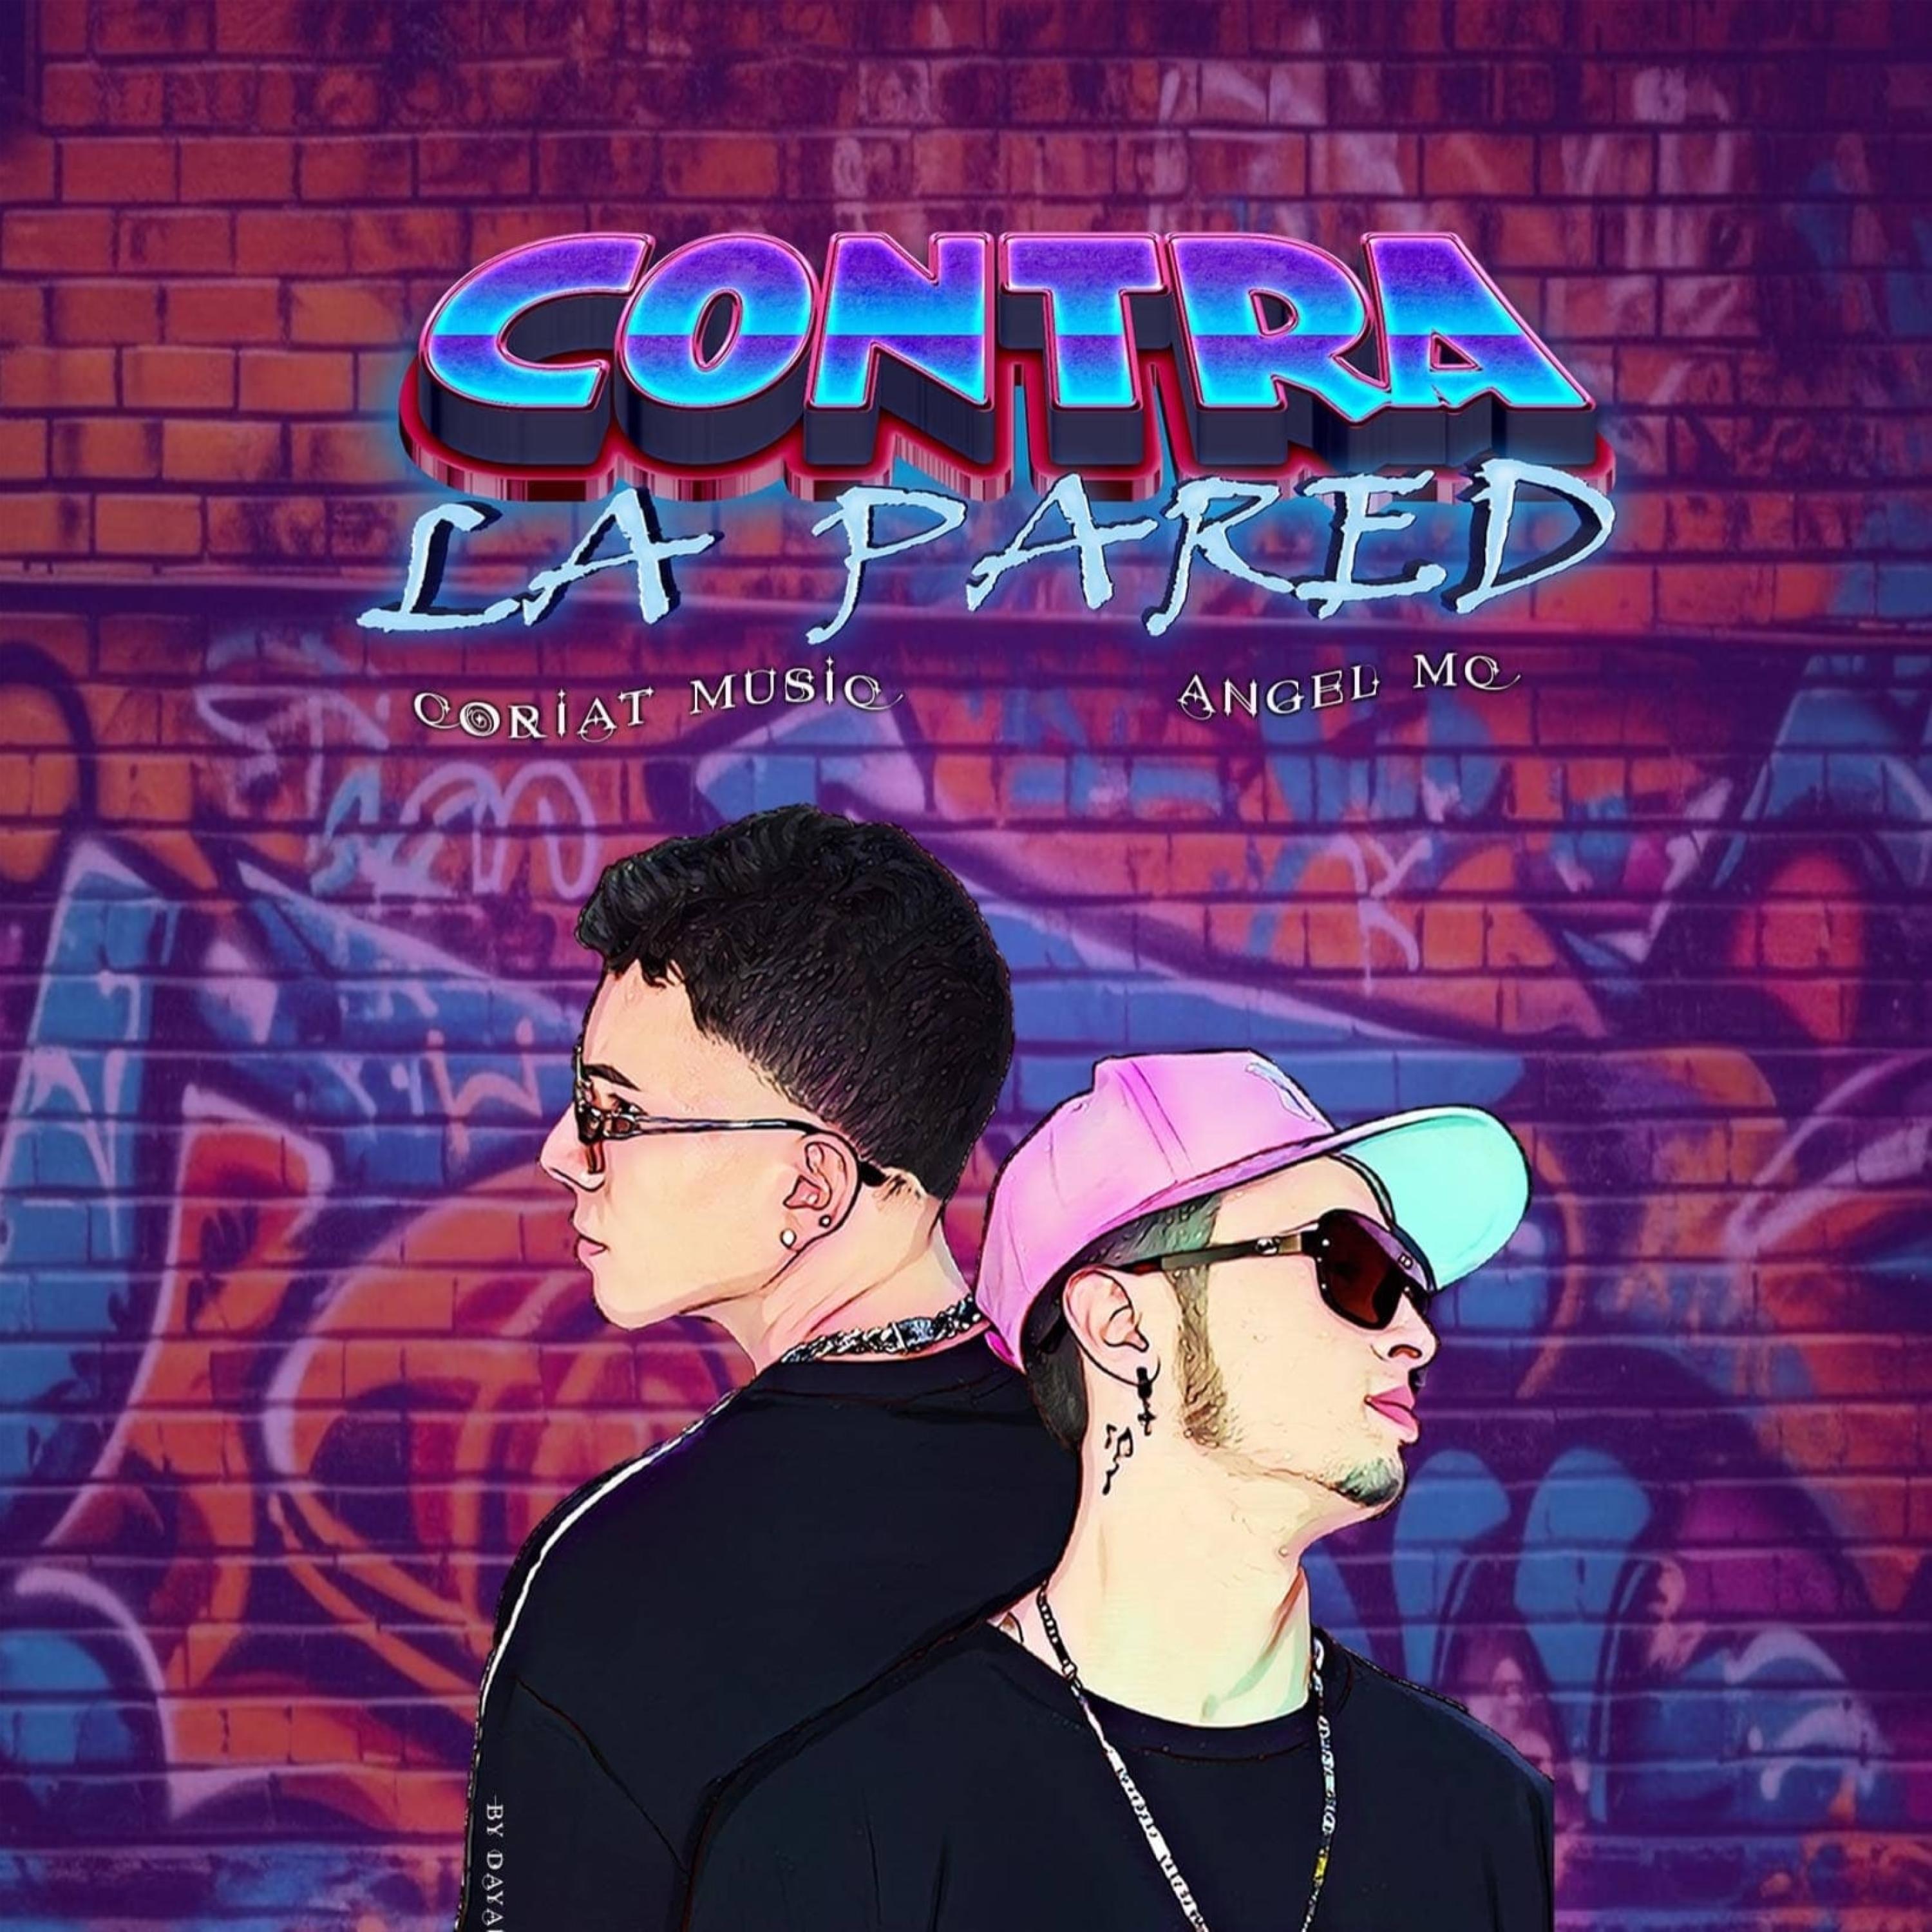 Fromthehouse - Contra La Pared (feat. Coriatmusic & Angel MC)